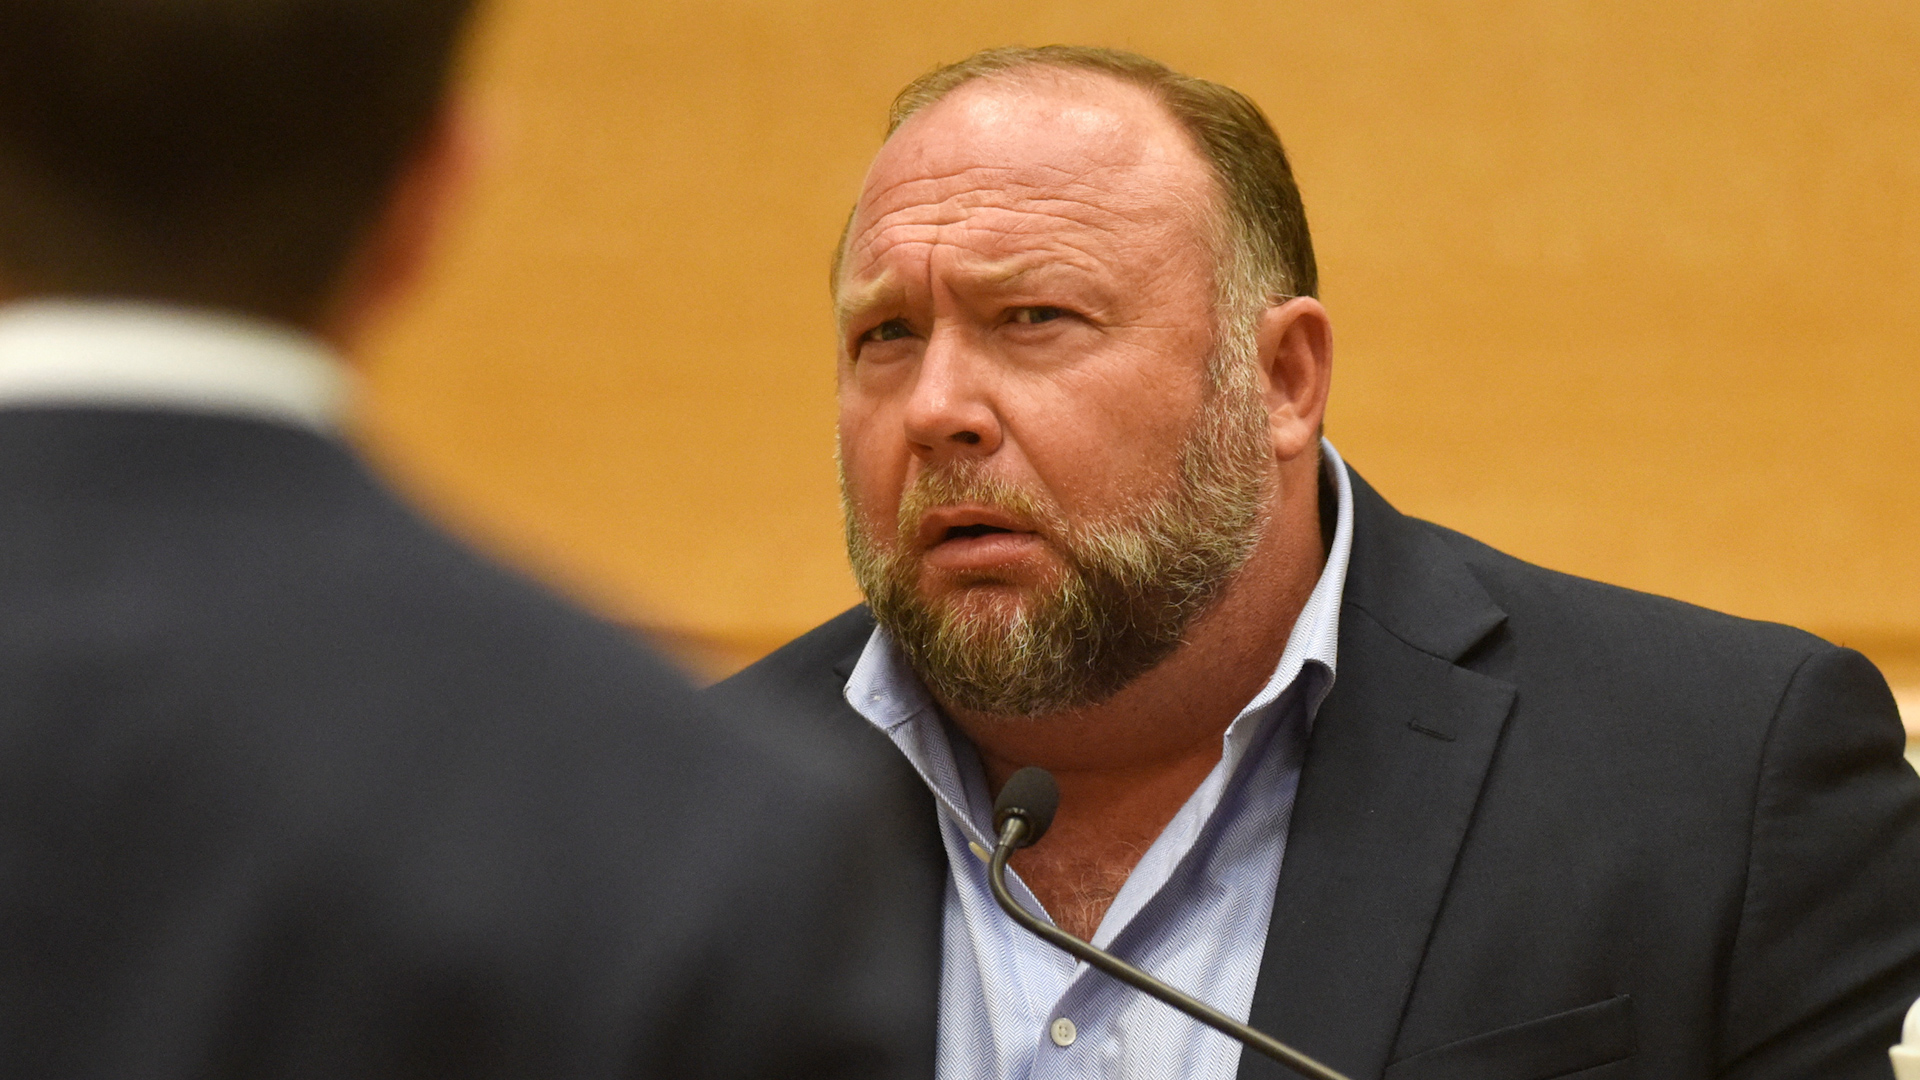 Alex Jones ordered to pay $4.1 million for falsely claiming Sandy Hook was  a hoax